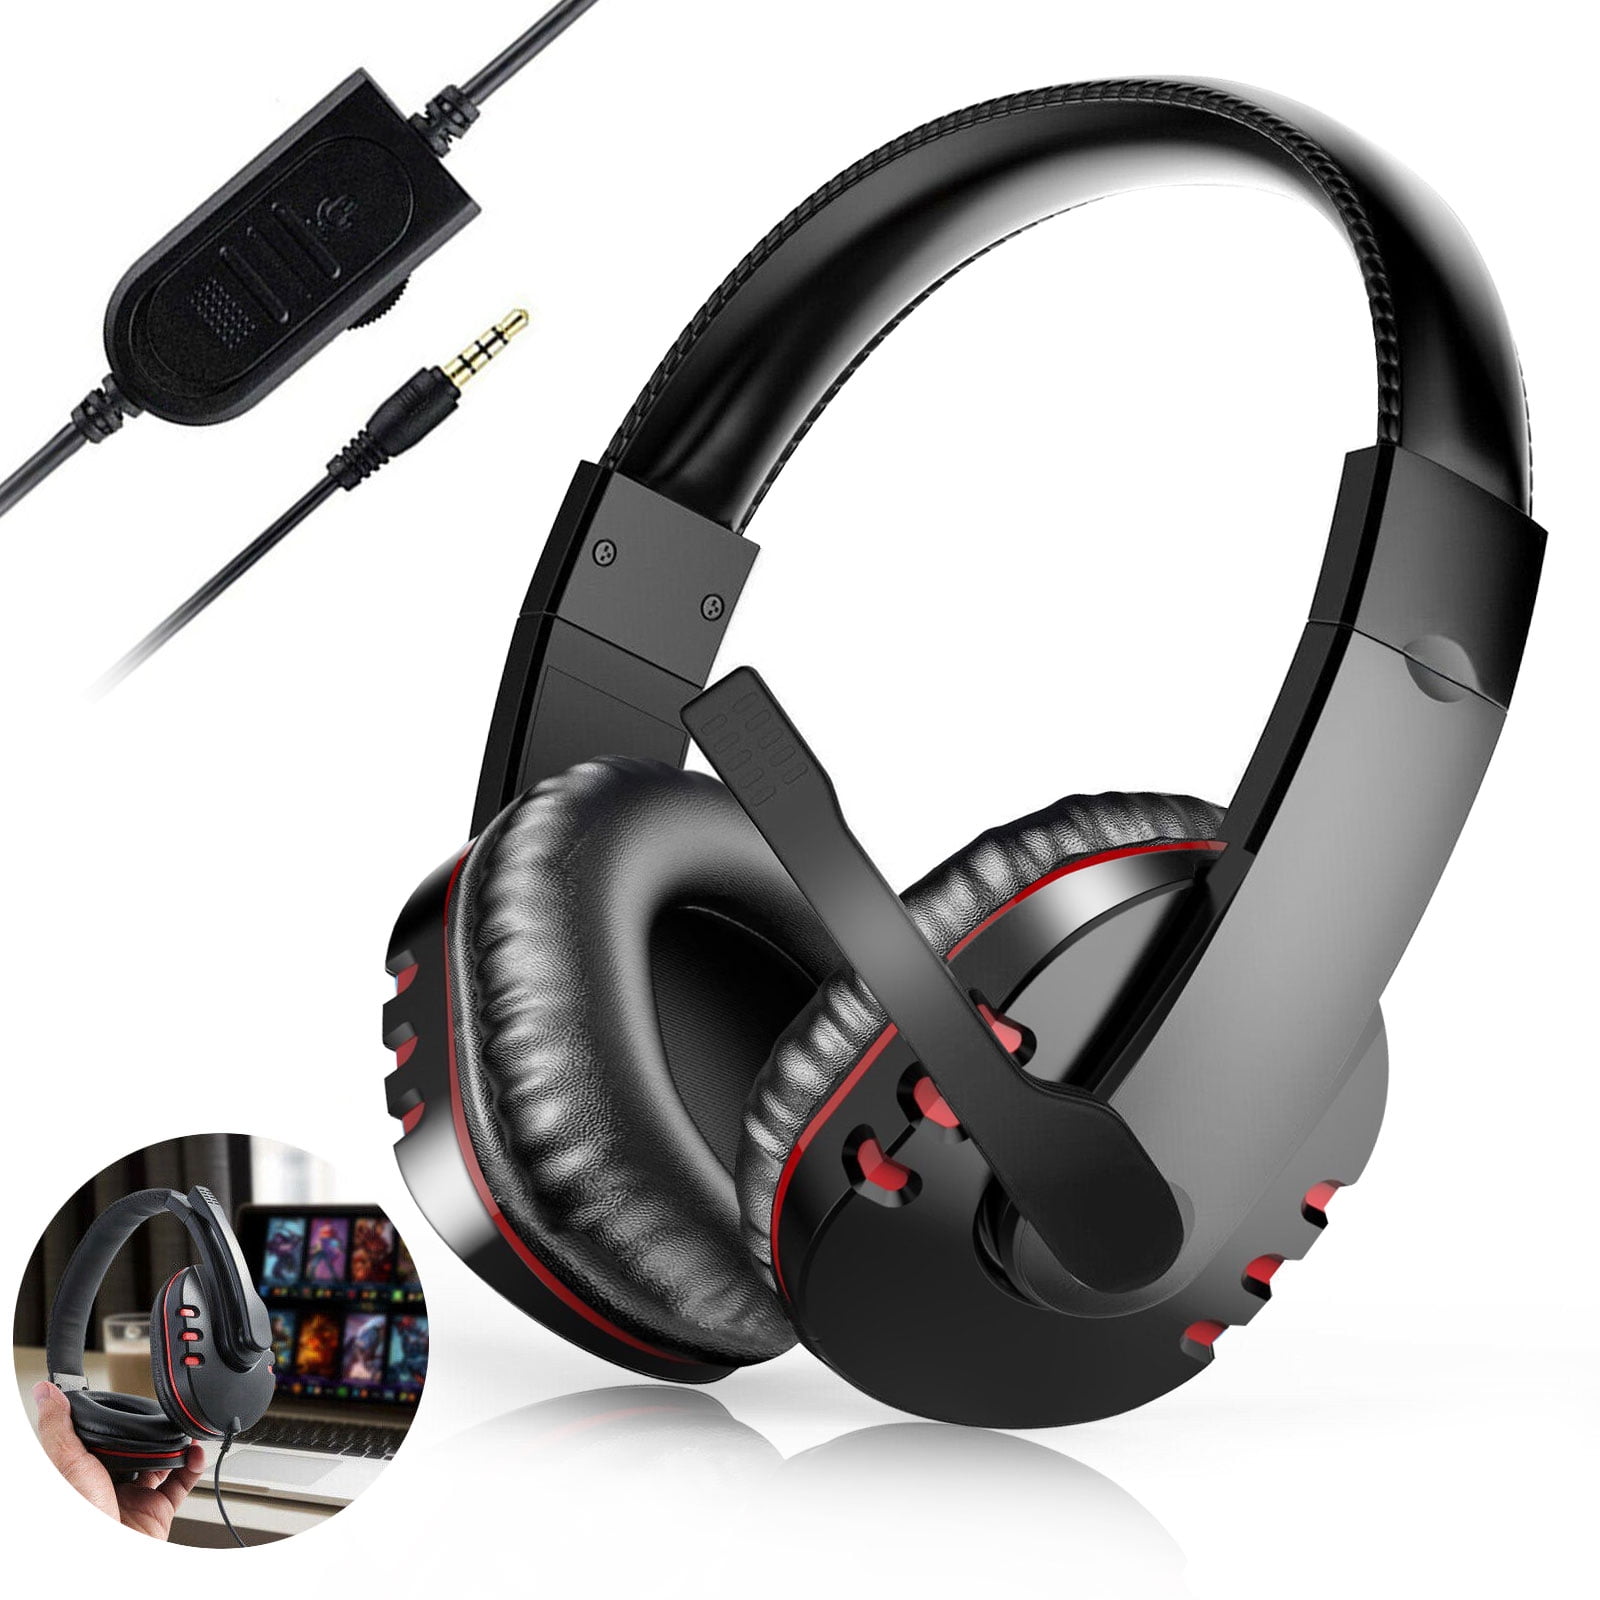 Headphones with mic for ps4